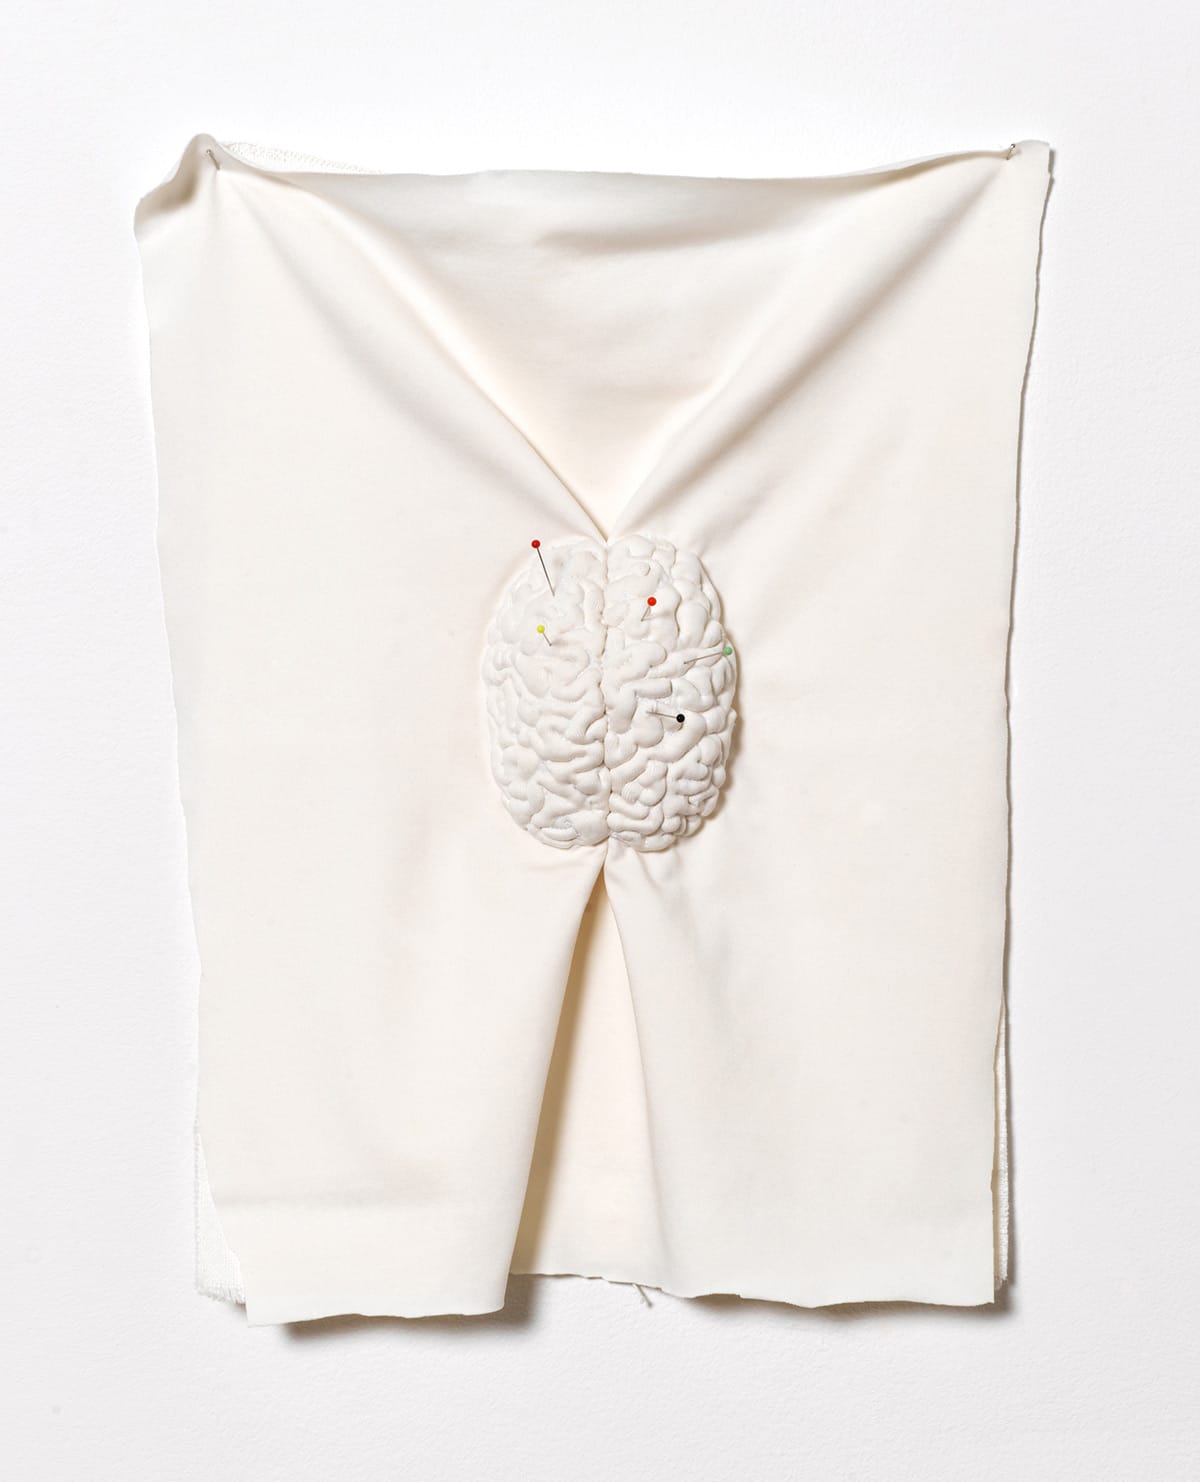 Anatomical Sculptures Made From Zippers, Quilted Fabric, And Felt By Élodie Antoine (6)